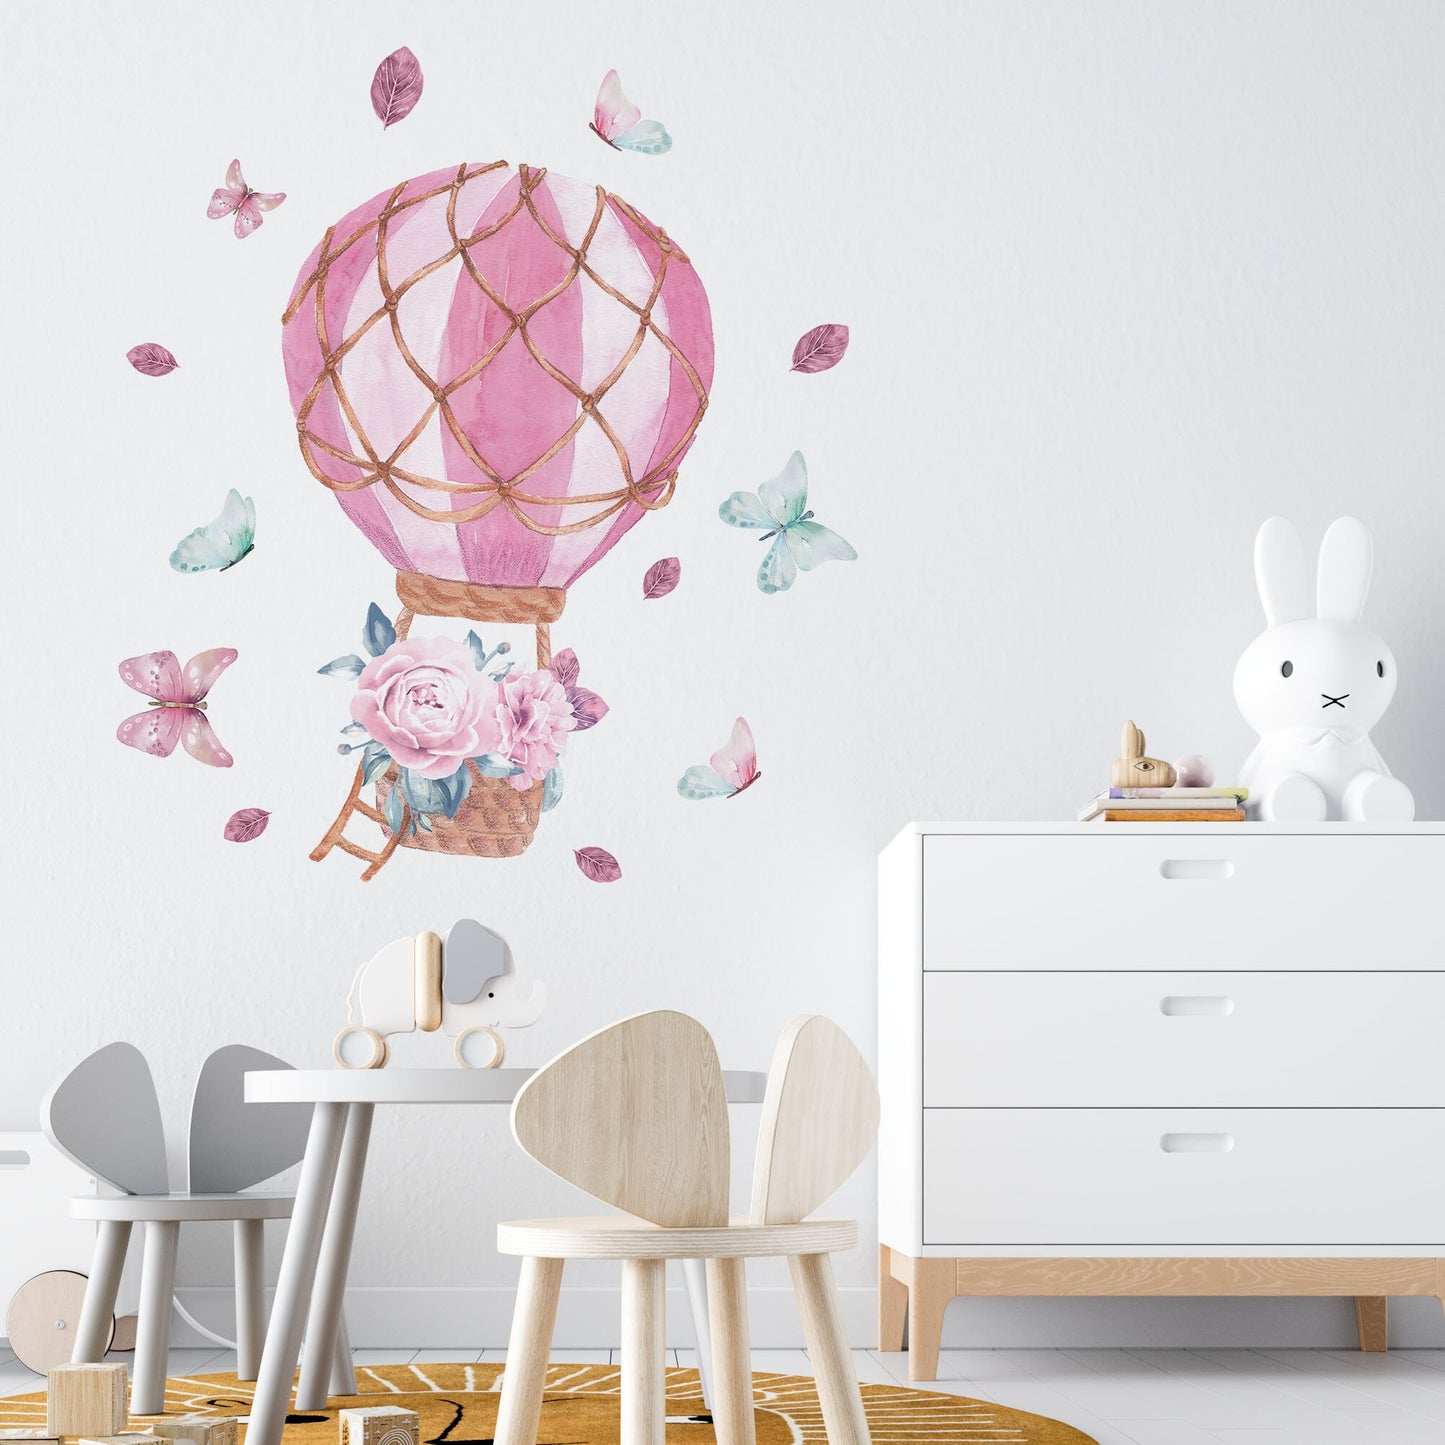 Hot Air Balloon Wall Decal Flowers Stickers Peony Green Leaves,Butterfly, LF175